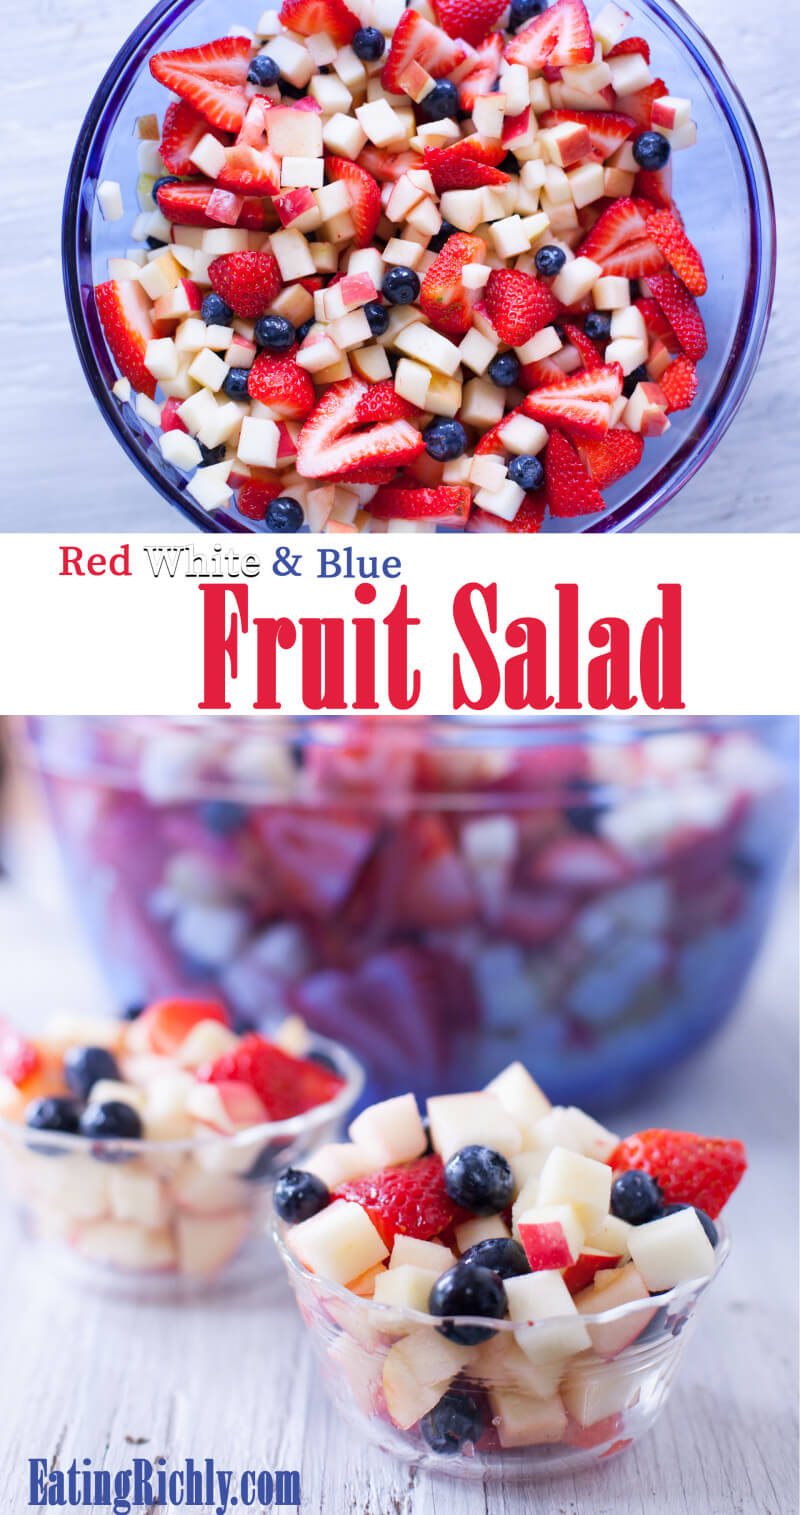 This red, white, and blue fruit salad recipe makes a great patriotic side dish or health dessert